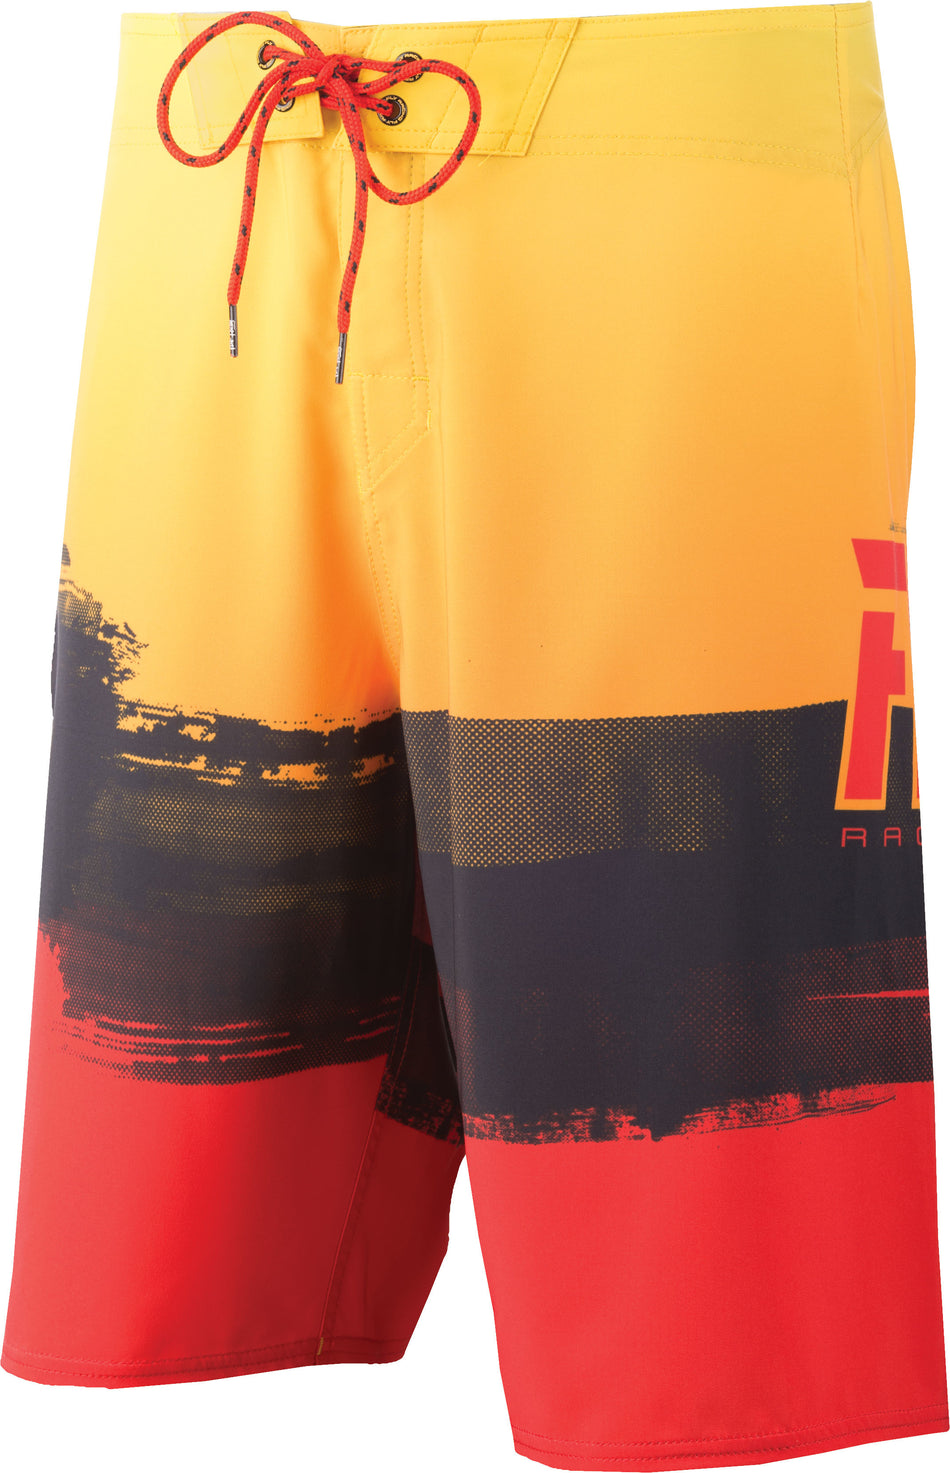 FLY RACING Fly Paint Slinger Boardshorts Red/Yellow Sz 38 353-19438